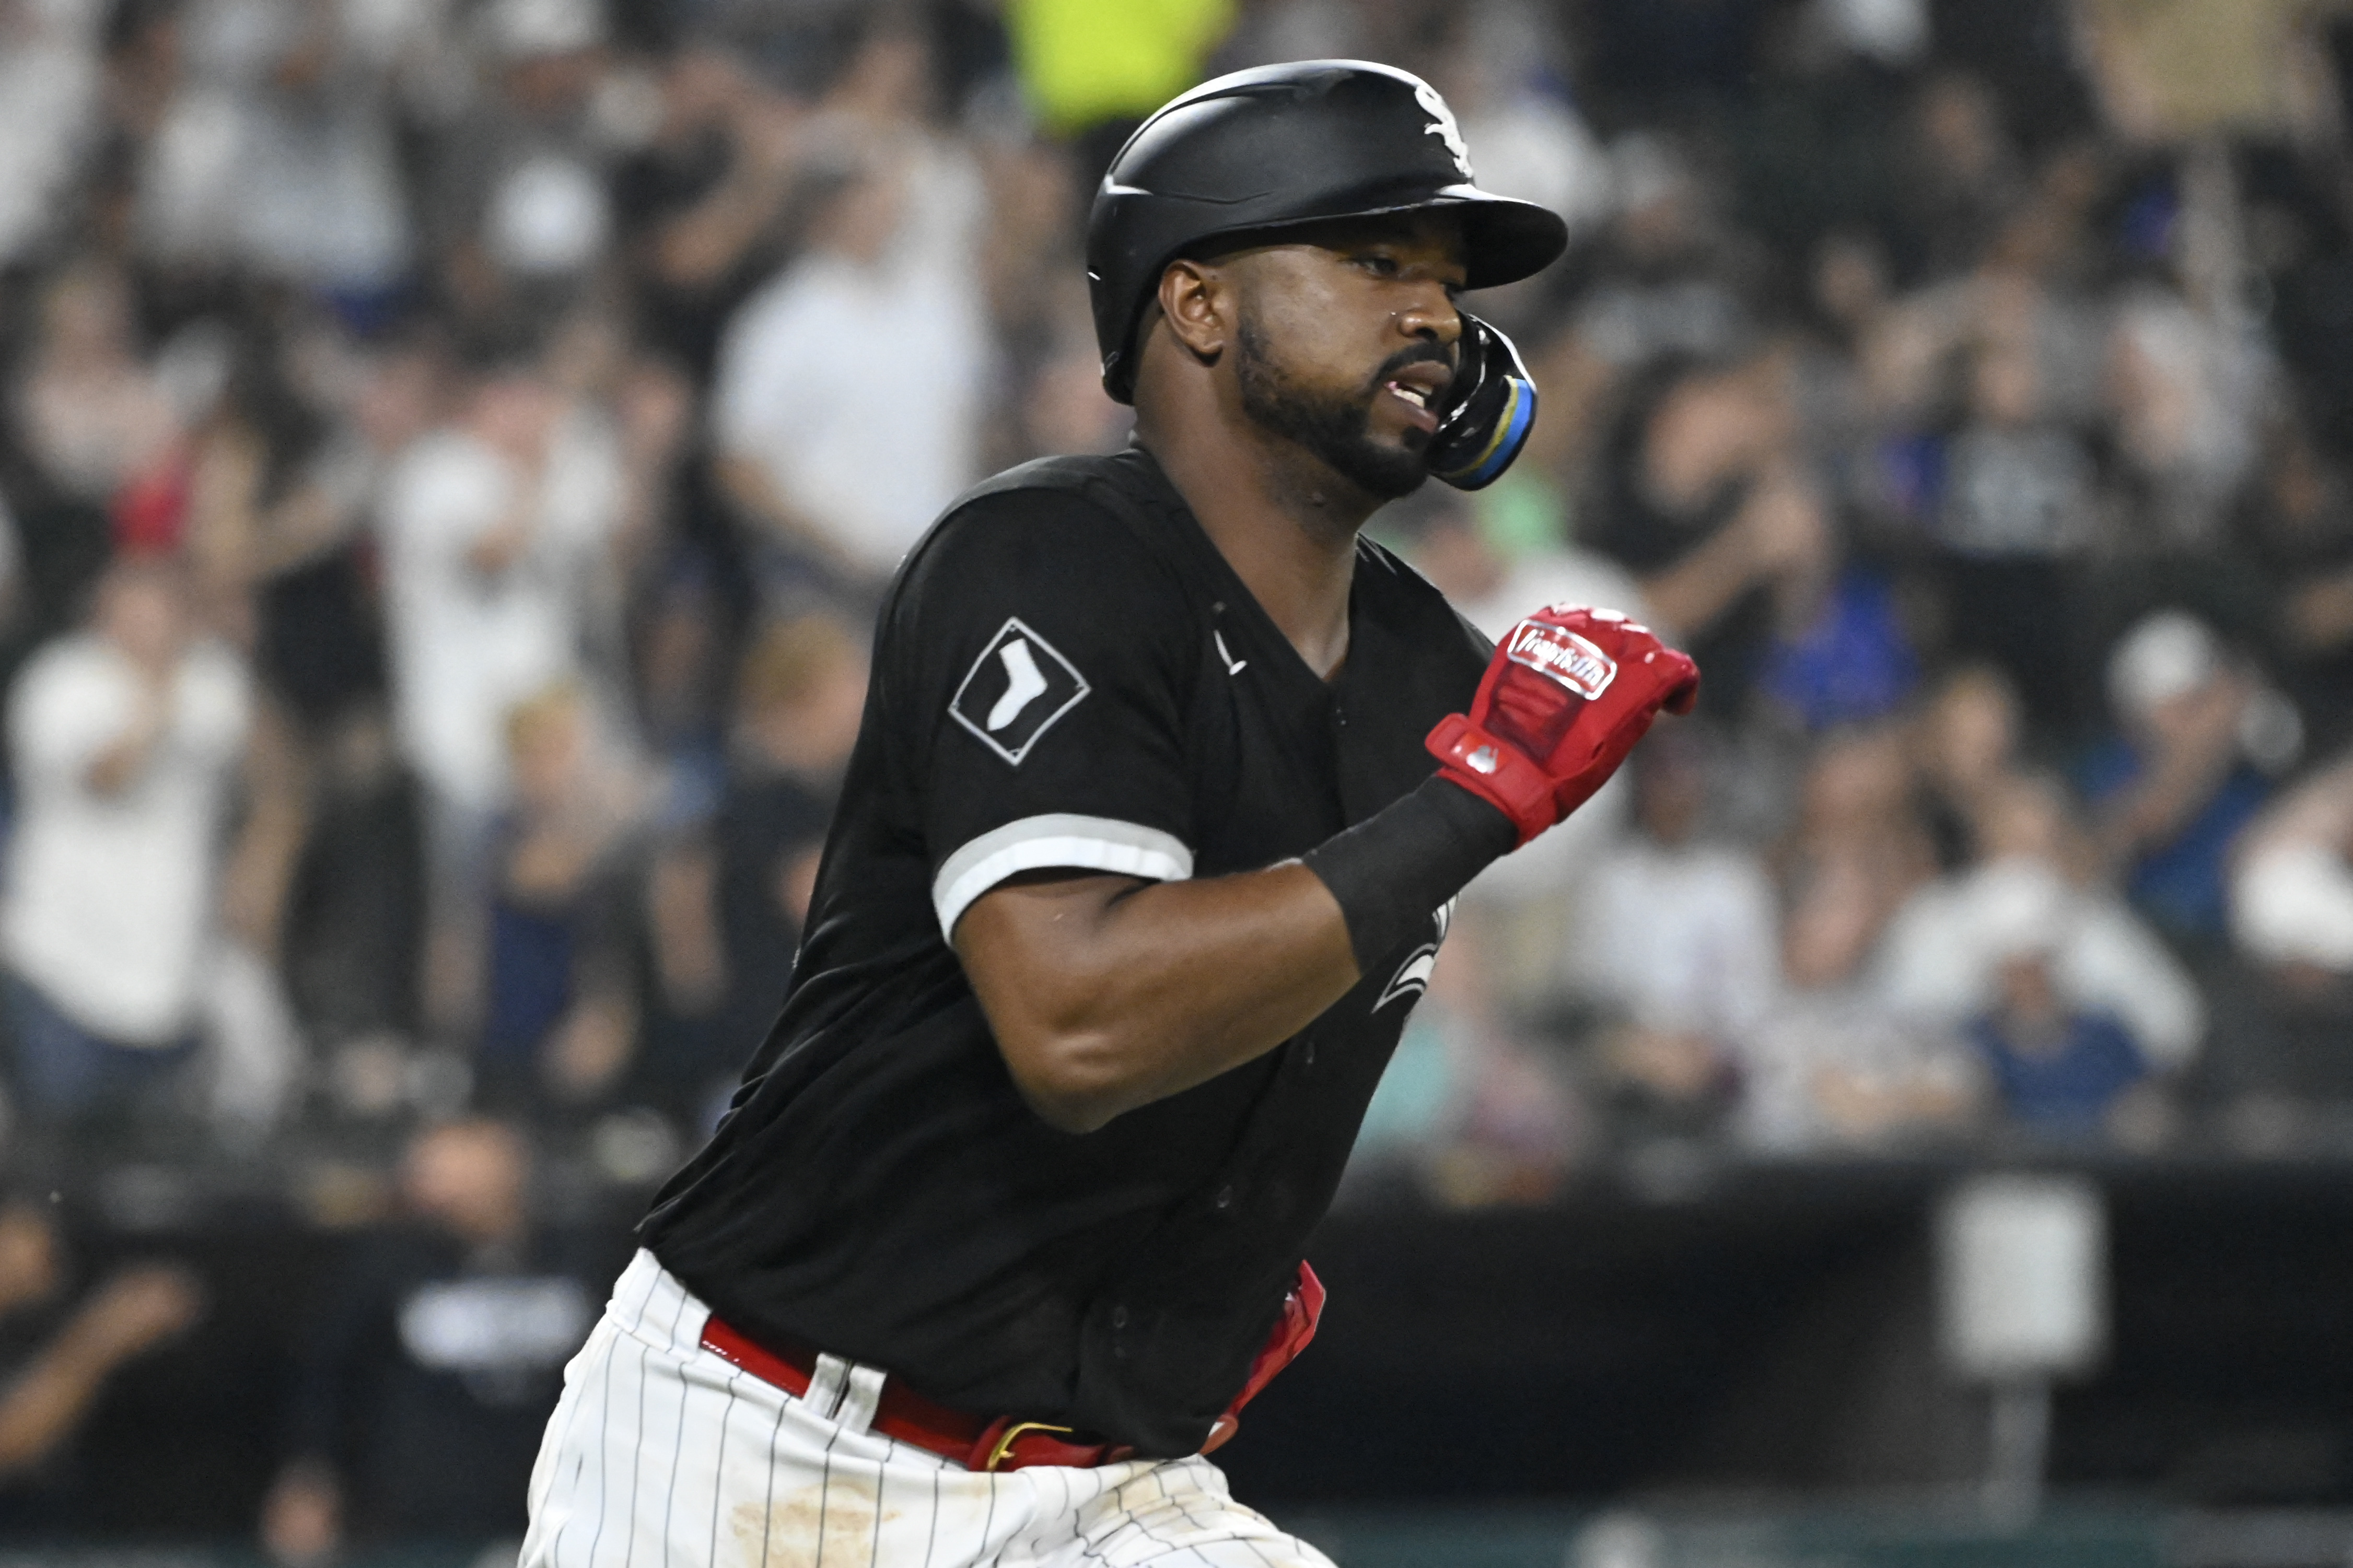 White Sox own the Cubs, Congratulations on beating a minor league team -  Chicago White Sox fans share mixed reactions after victory over Chicago Cubs,  expect better from their team